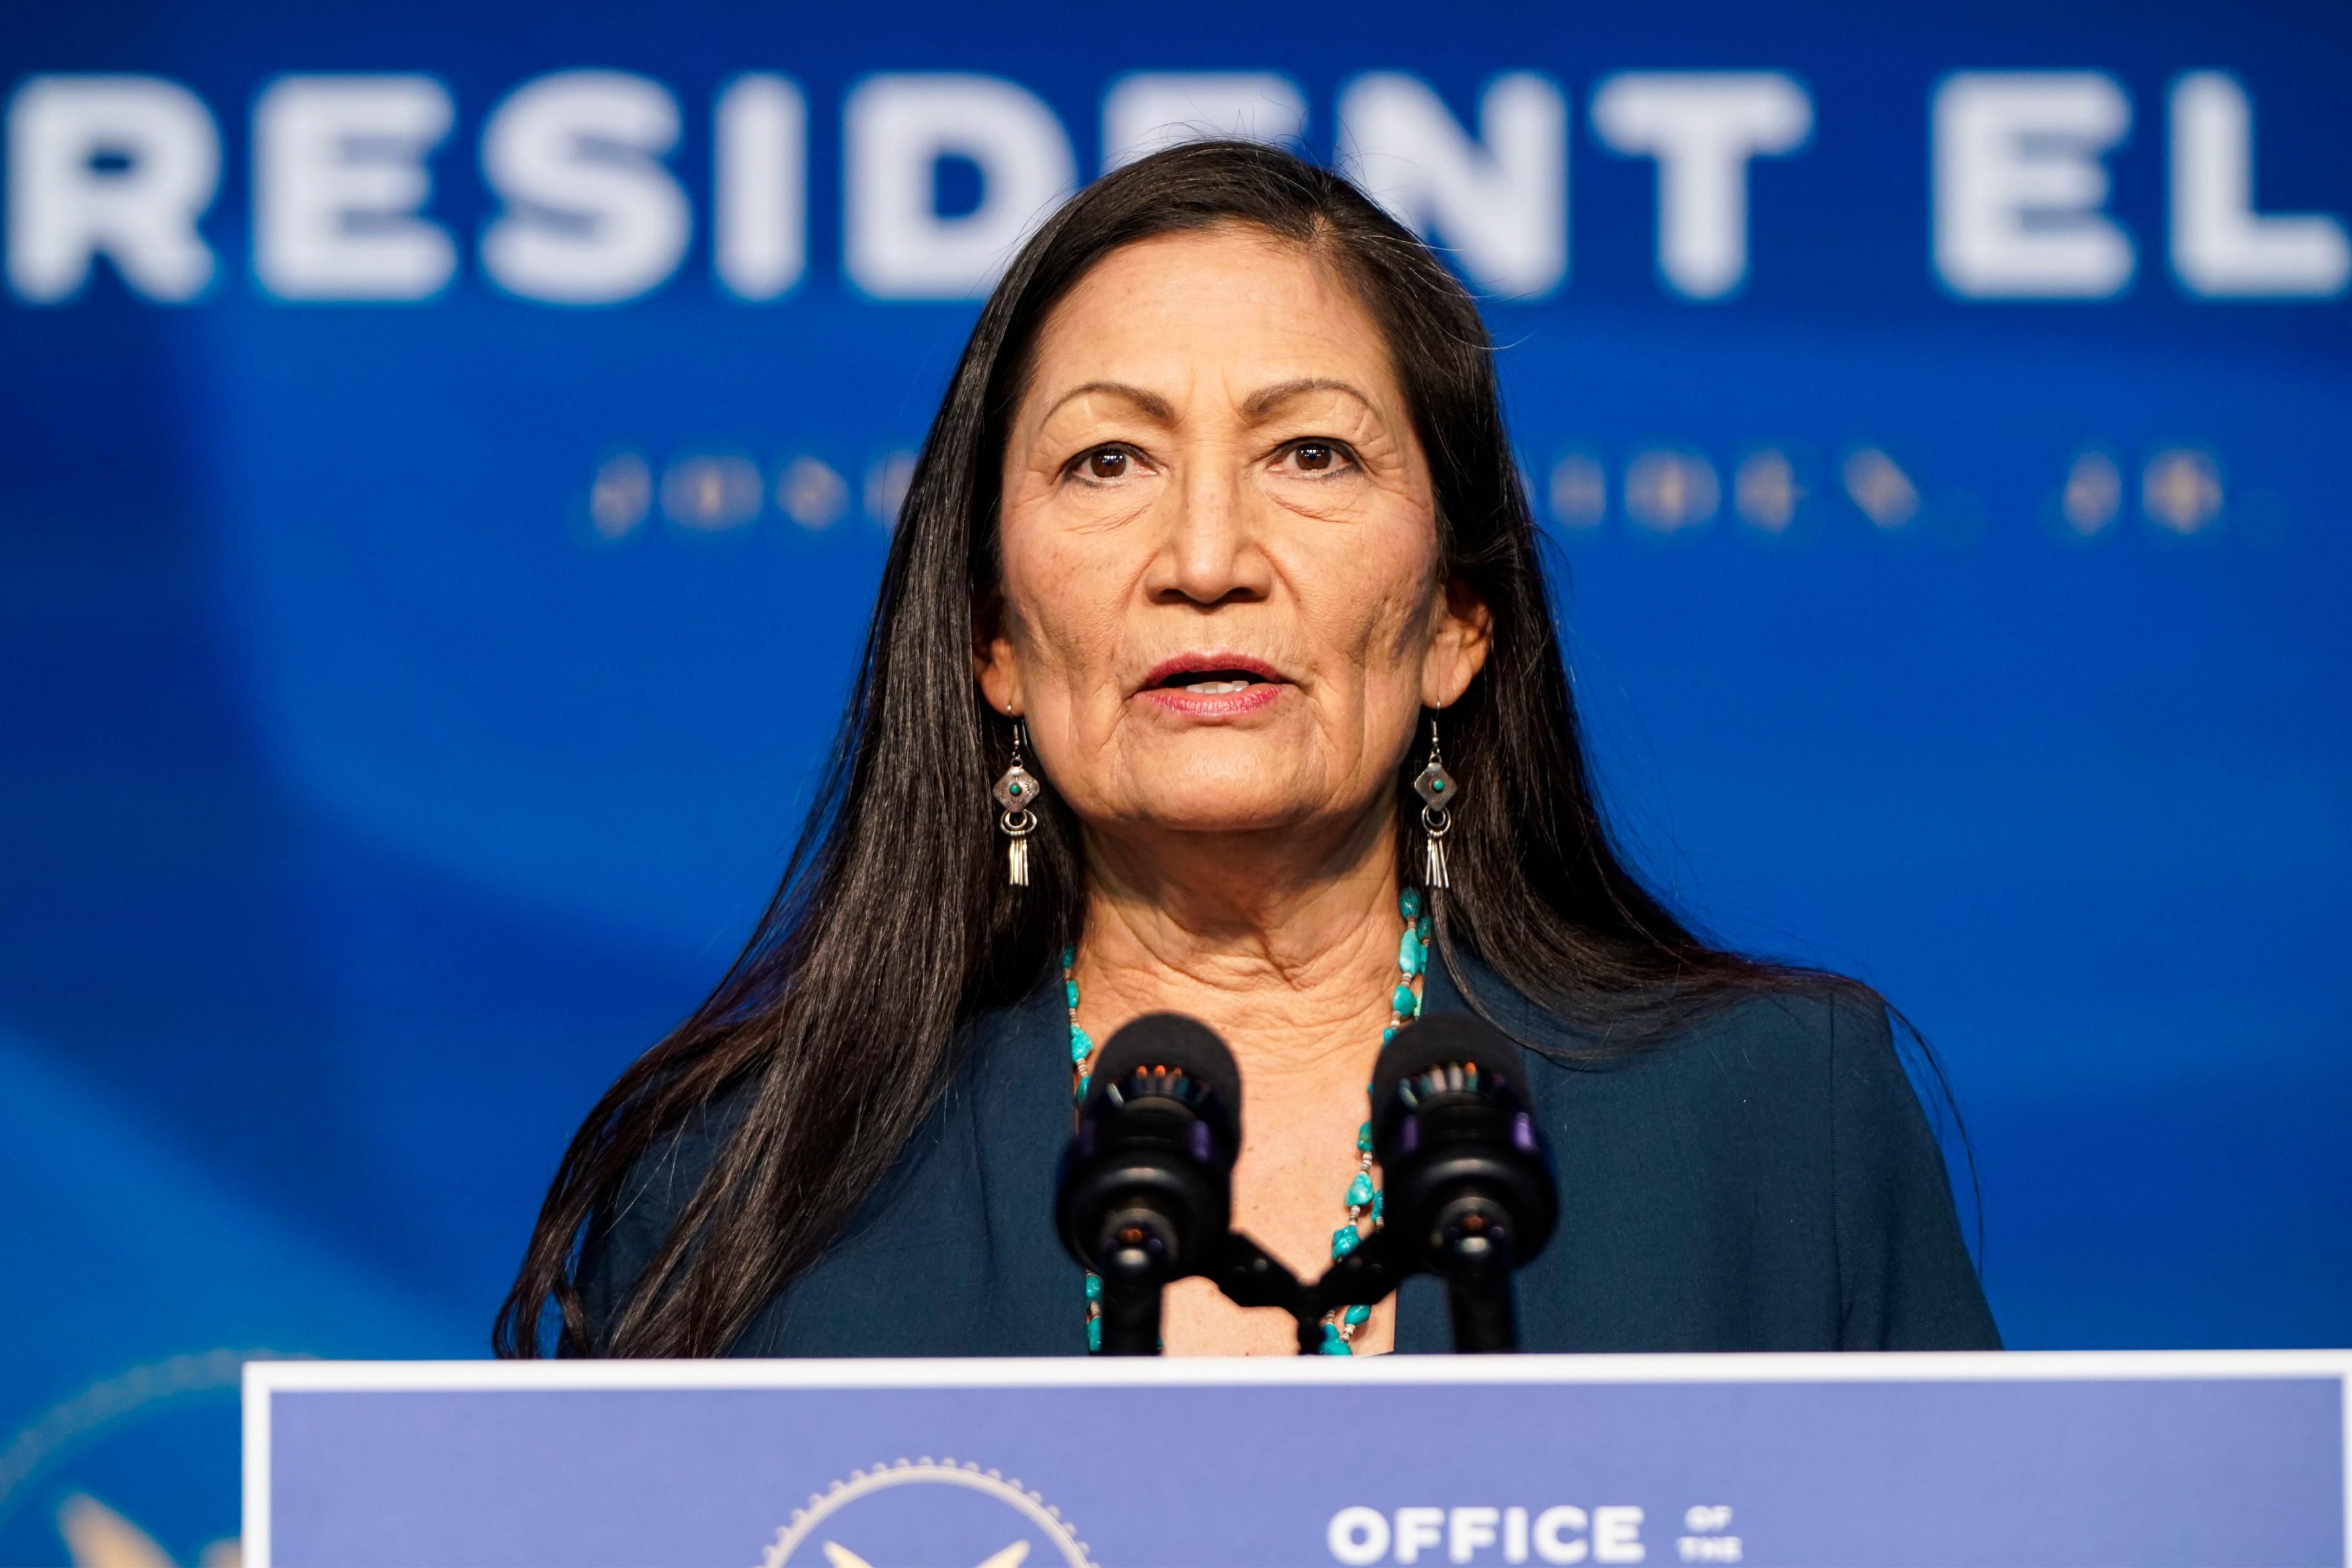 Then-nominee for Interior Secretary, Rep. Deb Haaland (D-N.M.), speaks after then-President-elect Joe Biden announced his climate and energy appointments at the Queen Theater on December 19, 2020 in Wilmington, Delaware. (Photo: Joshua Roberts viaGetty Images)